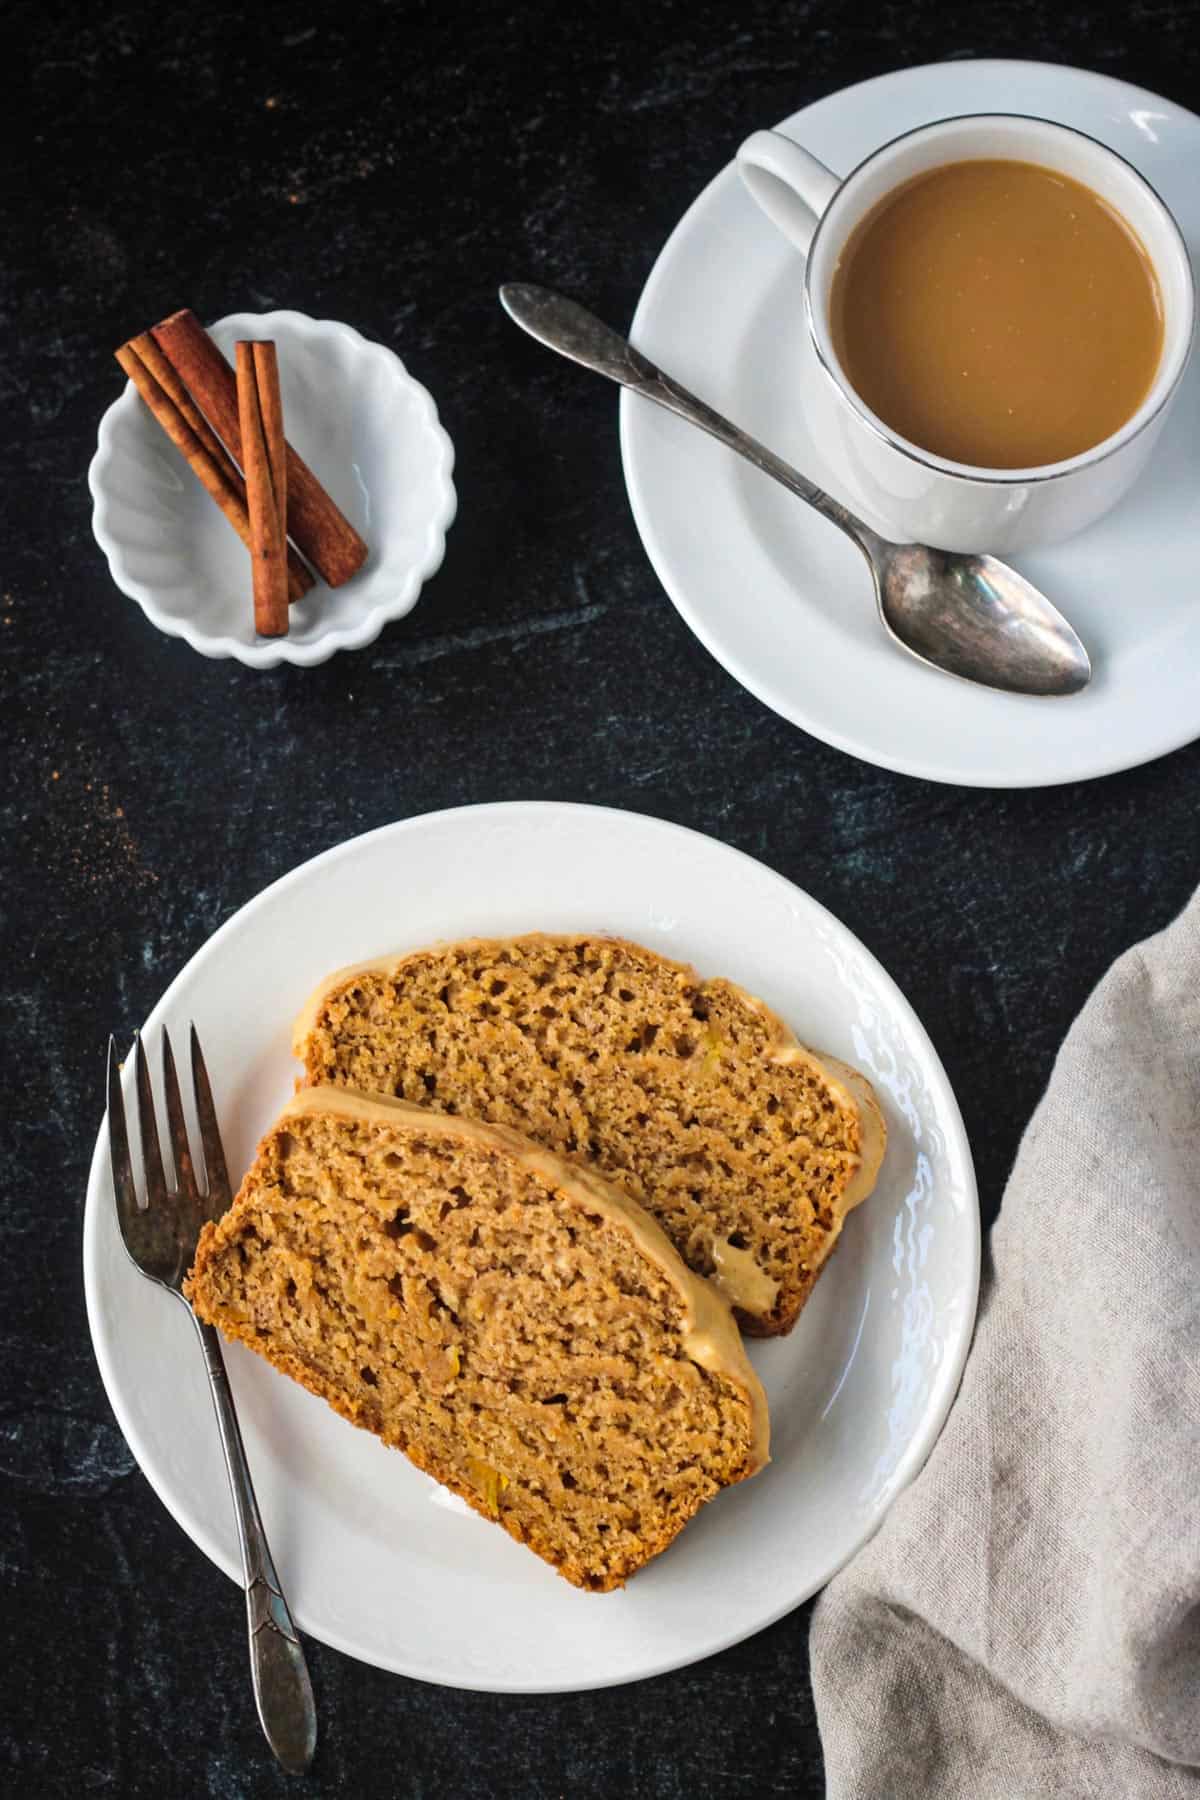 Two slices of butternut squash bread on a plate next to a cup of coffee.